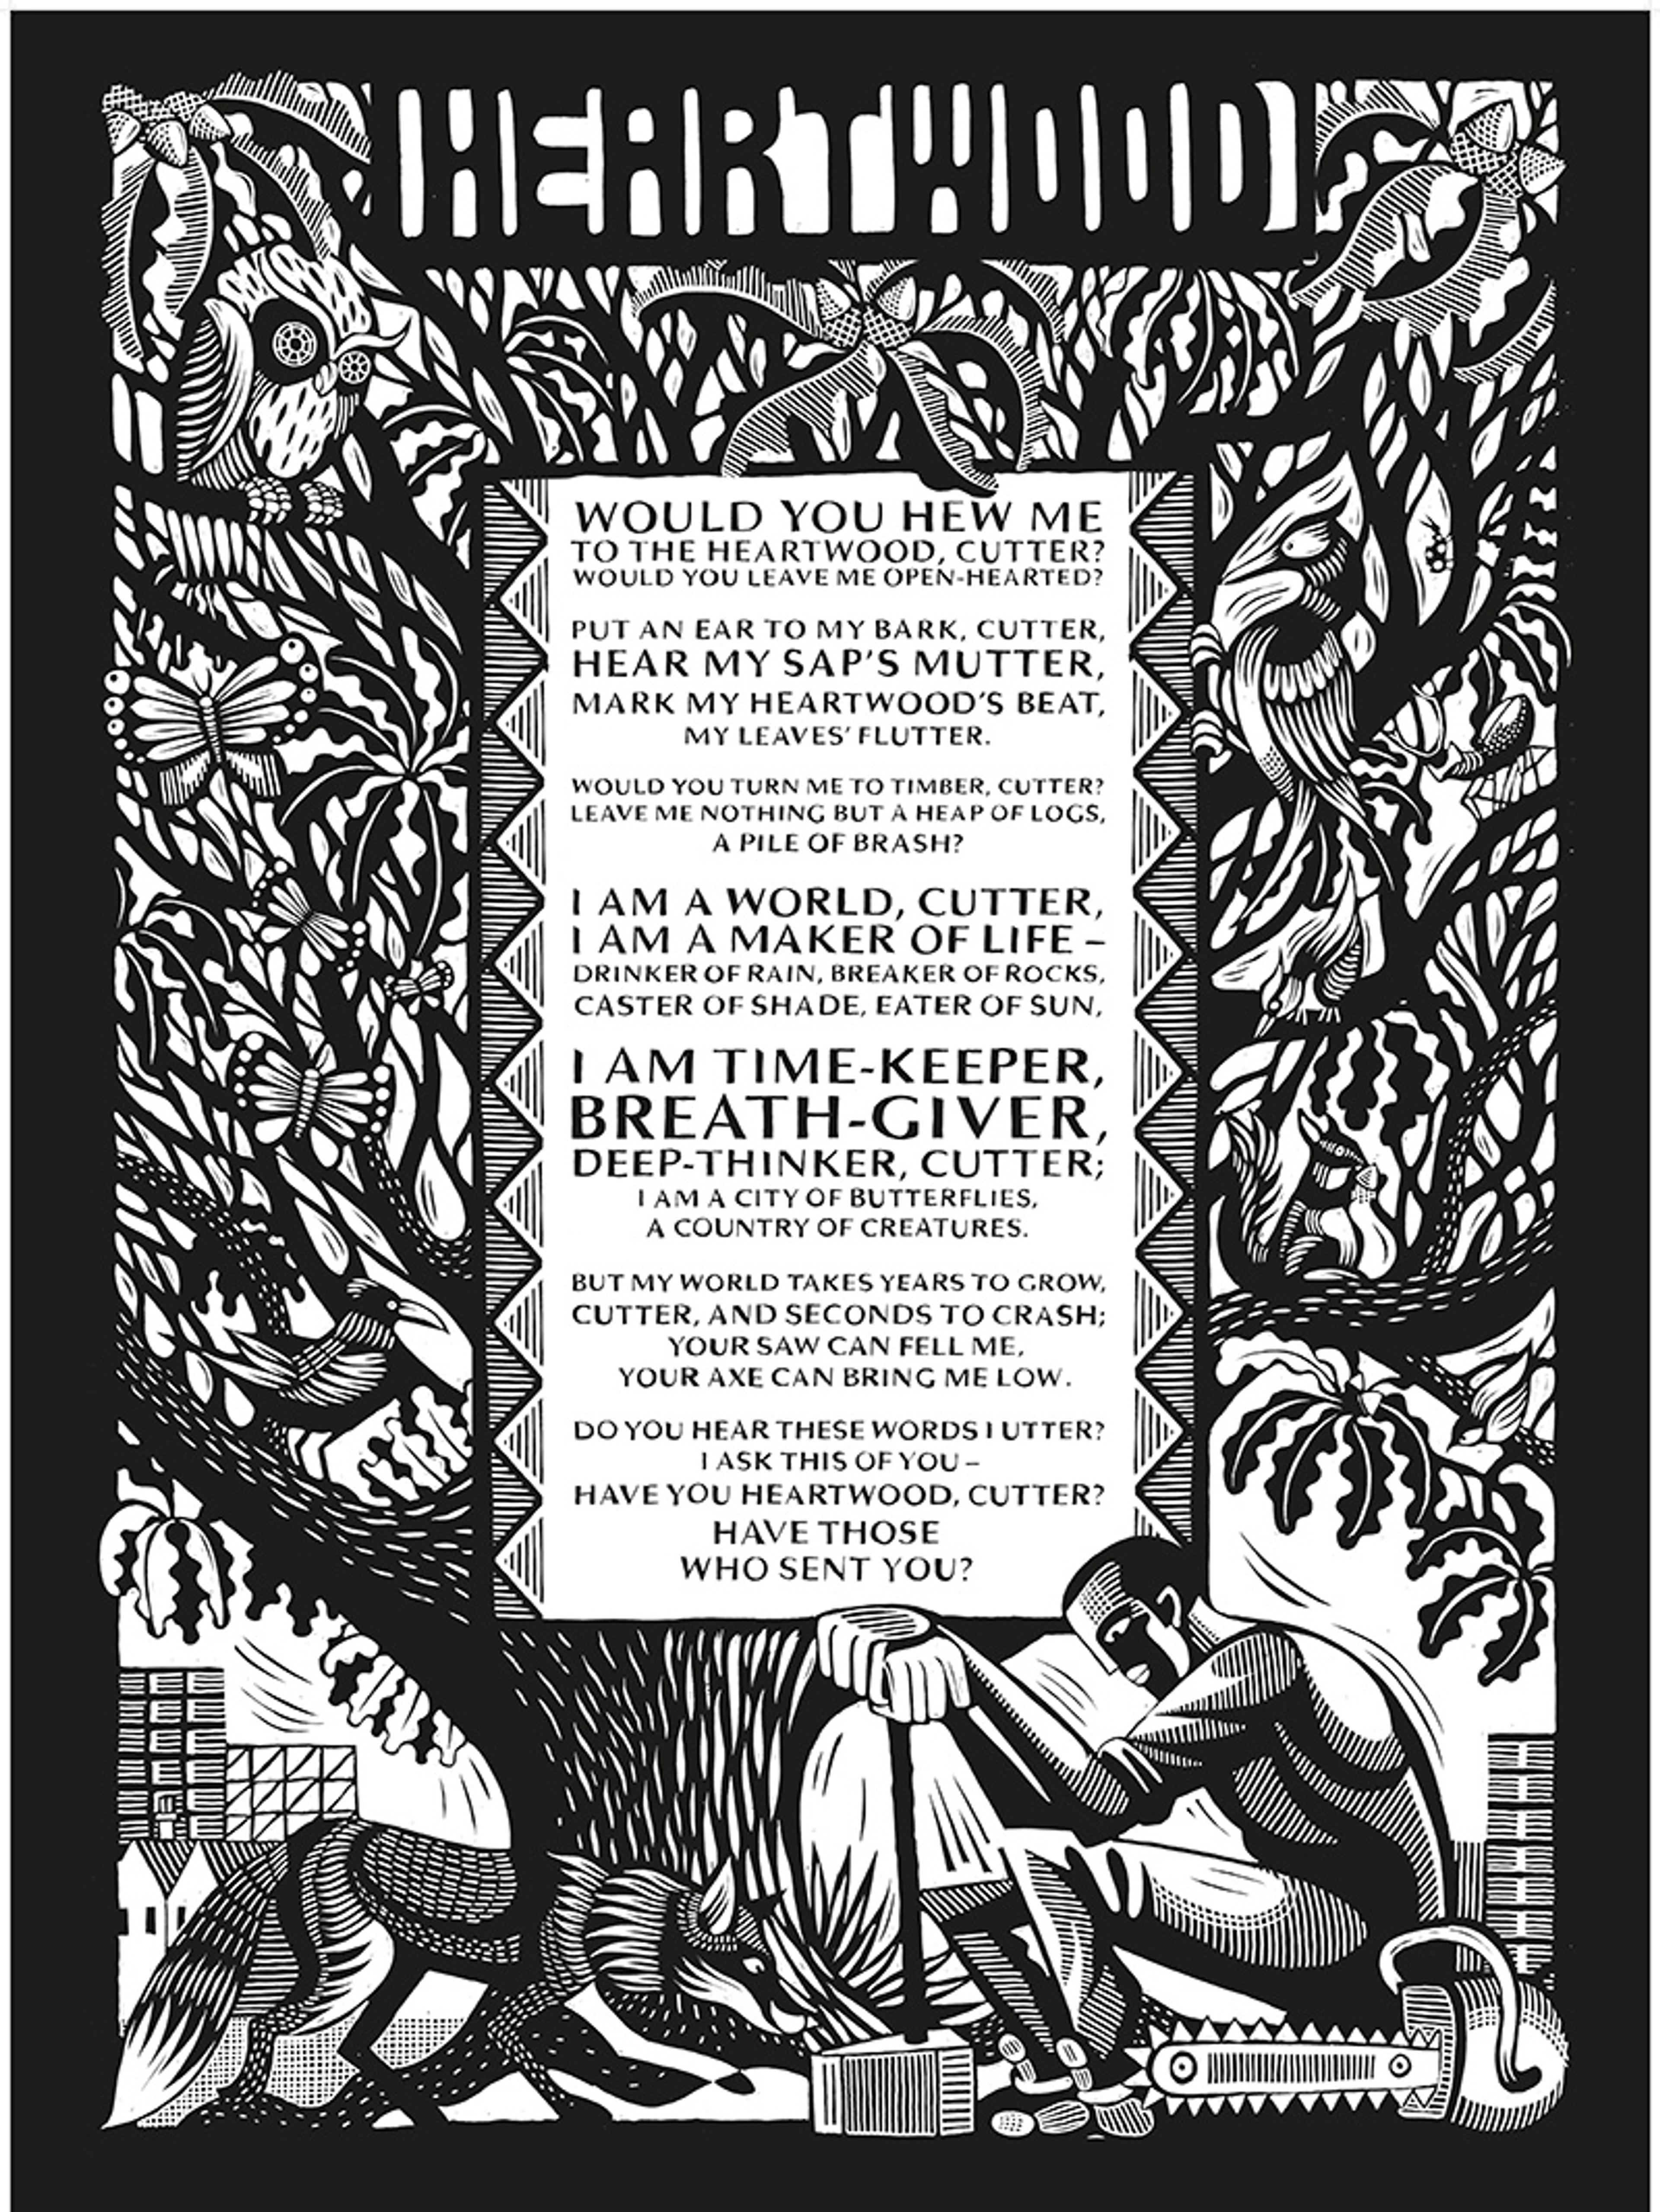 Black and white illustration titled “Heartwood” with detailed nature-inspired designs, trees, animals, and a poem about a tree addressing a woodcutter.